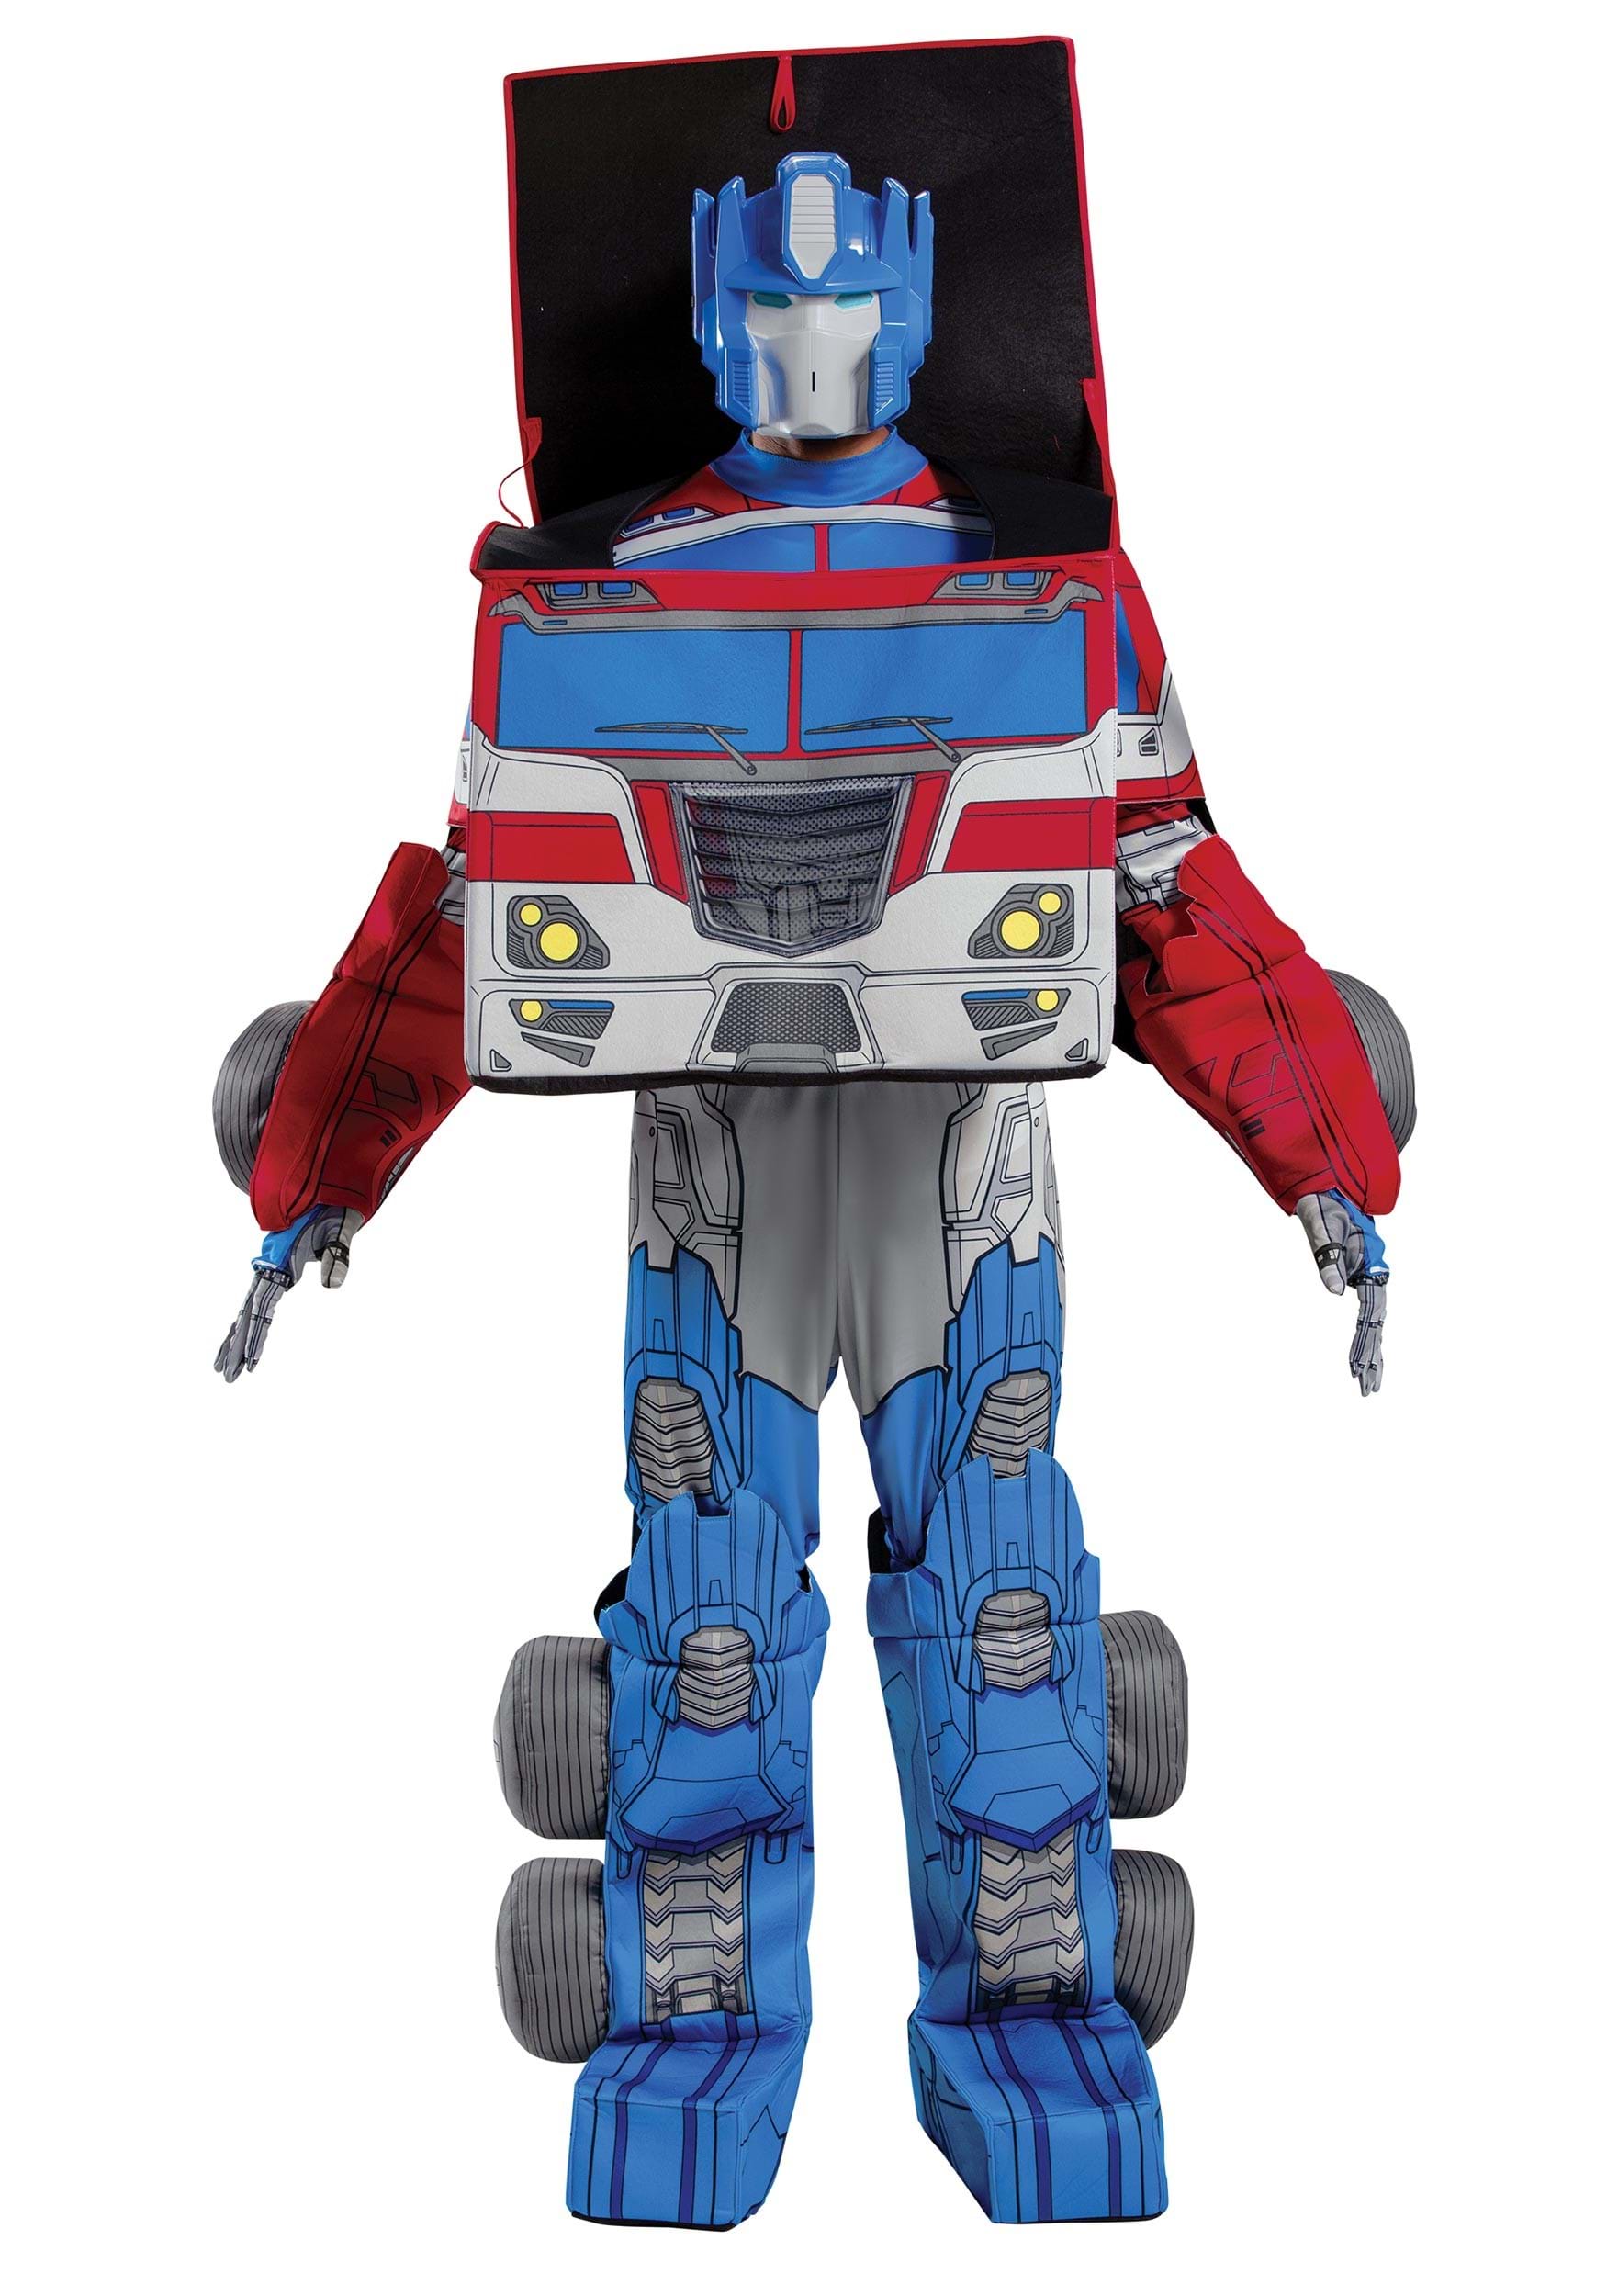 Image of Transformers Optimus Prime Converting Costume for Adults ID DI119389-M